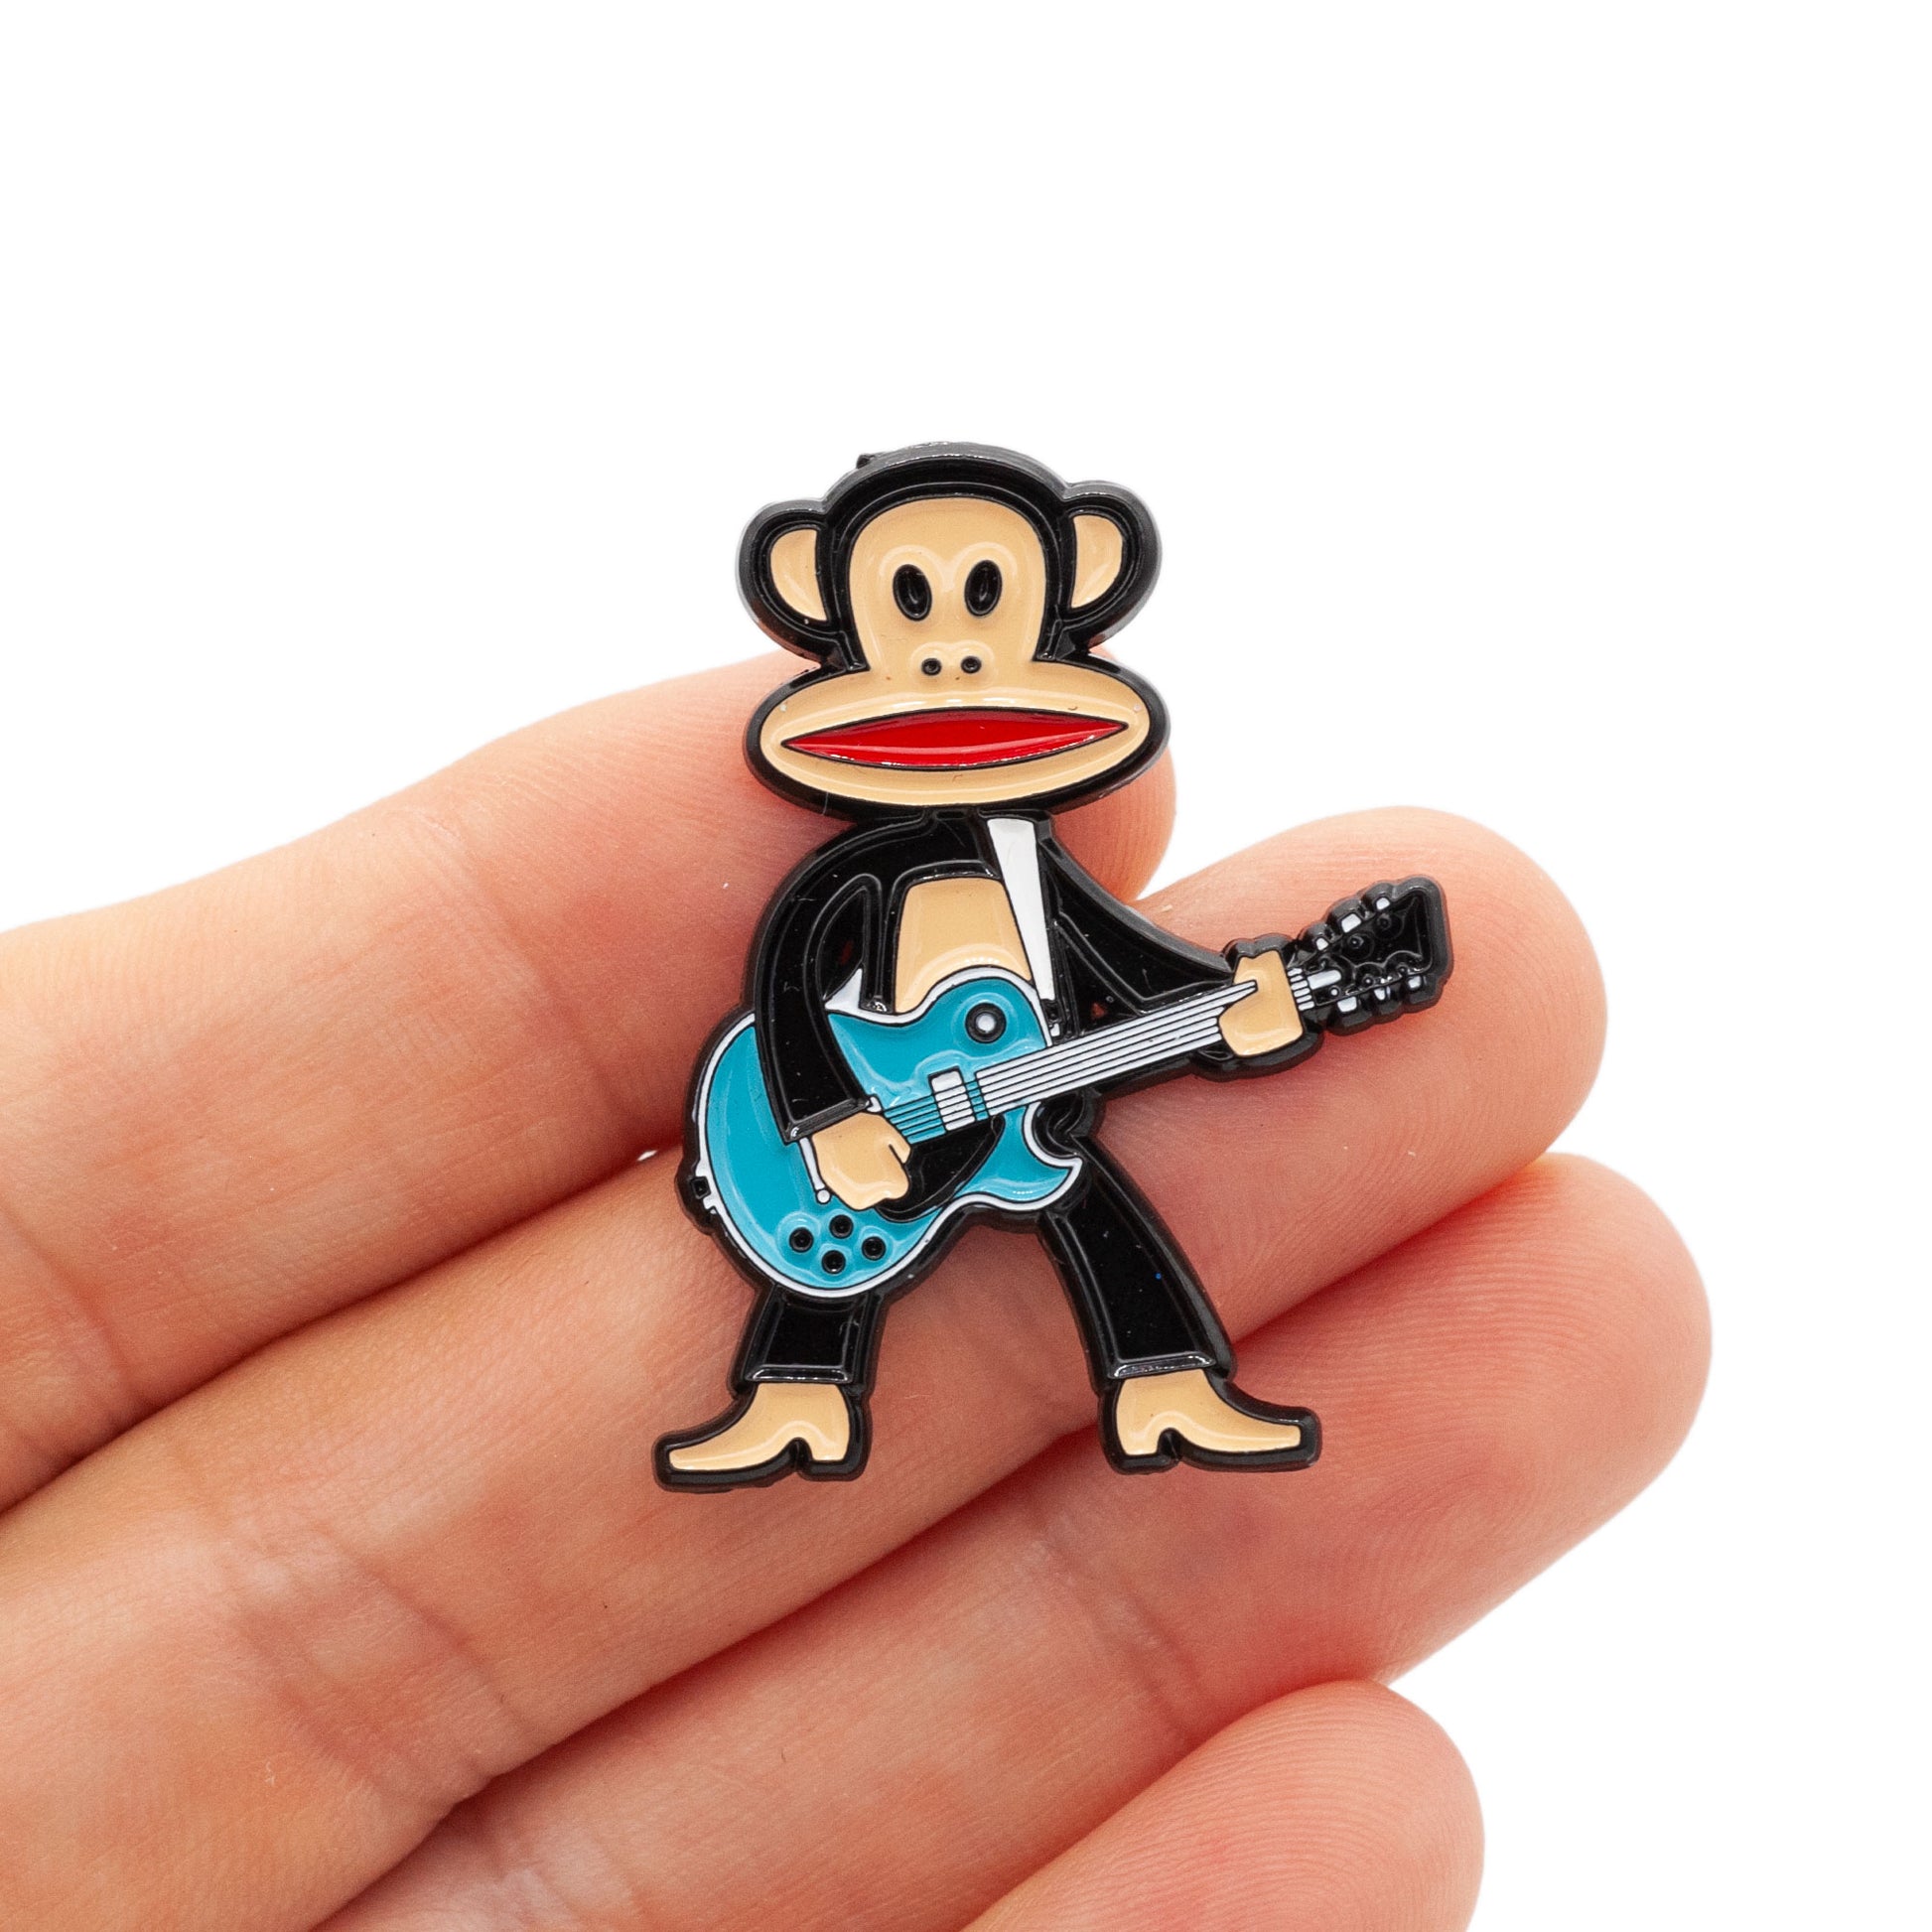 Julius the monkey is standing tall and rocking with his teal colored guitar! Julius has his mouth open, showing red, and is shot being held by a hand against a white background